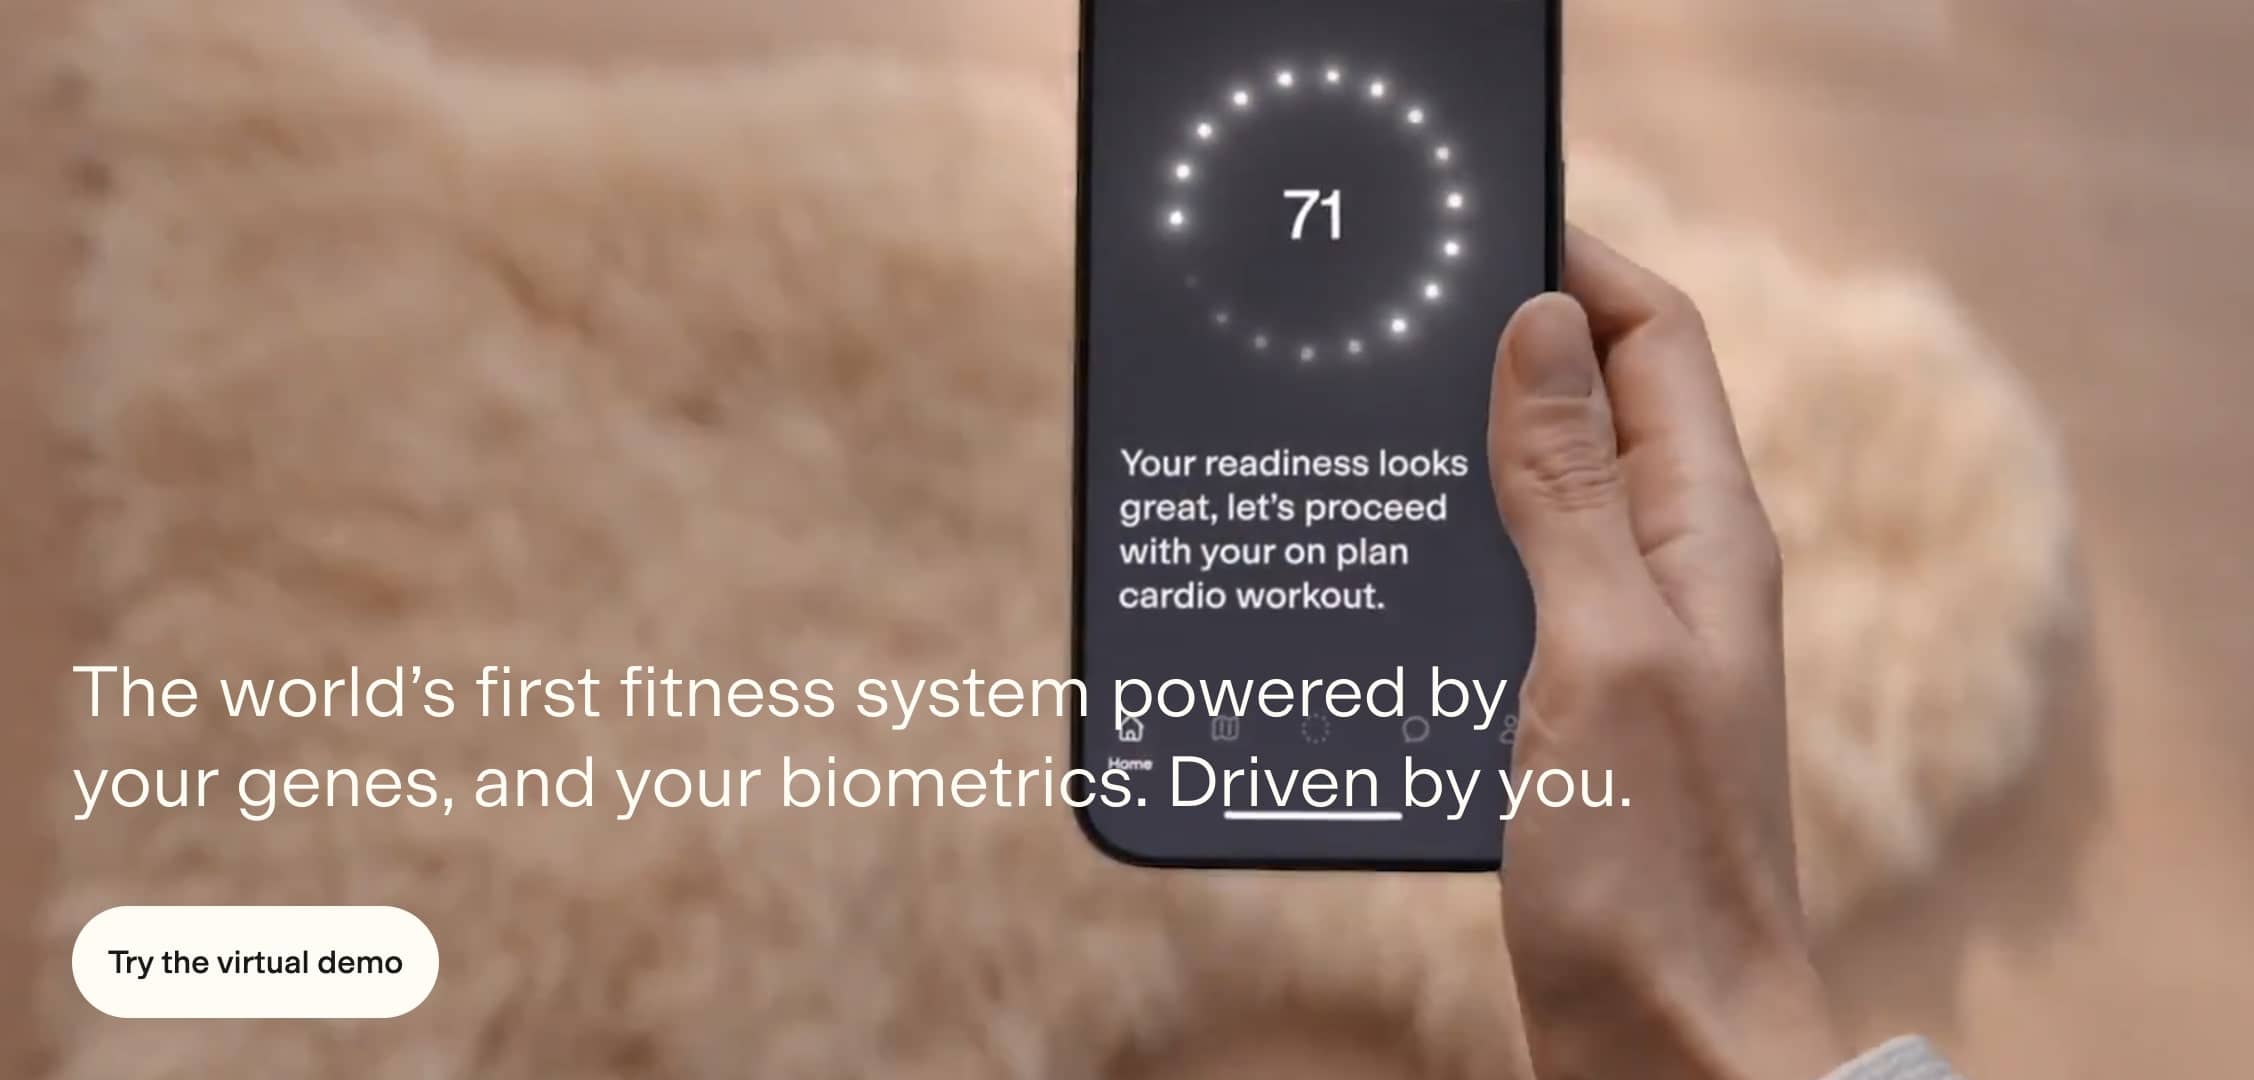 A person holds a smartphone displaying a fitness app with a readiness score of 71. Text on the image promotes a connected fitness system powered by genetics and biometrics. A "Try the virtual demo" button is visible. Discover the future of fitness in our 2024 Guide to staying ahead in the fitness industry.